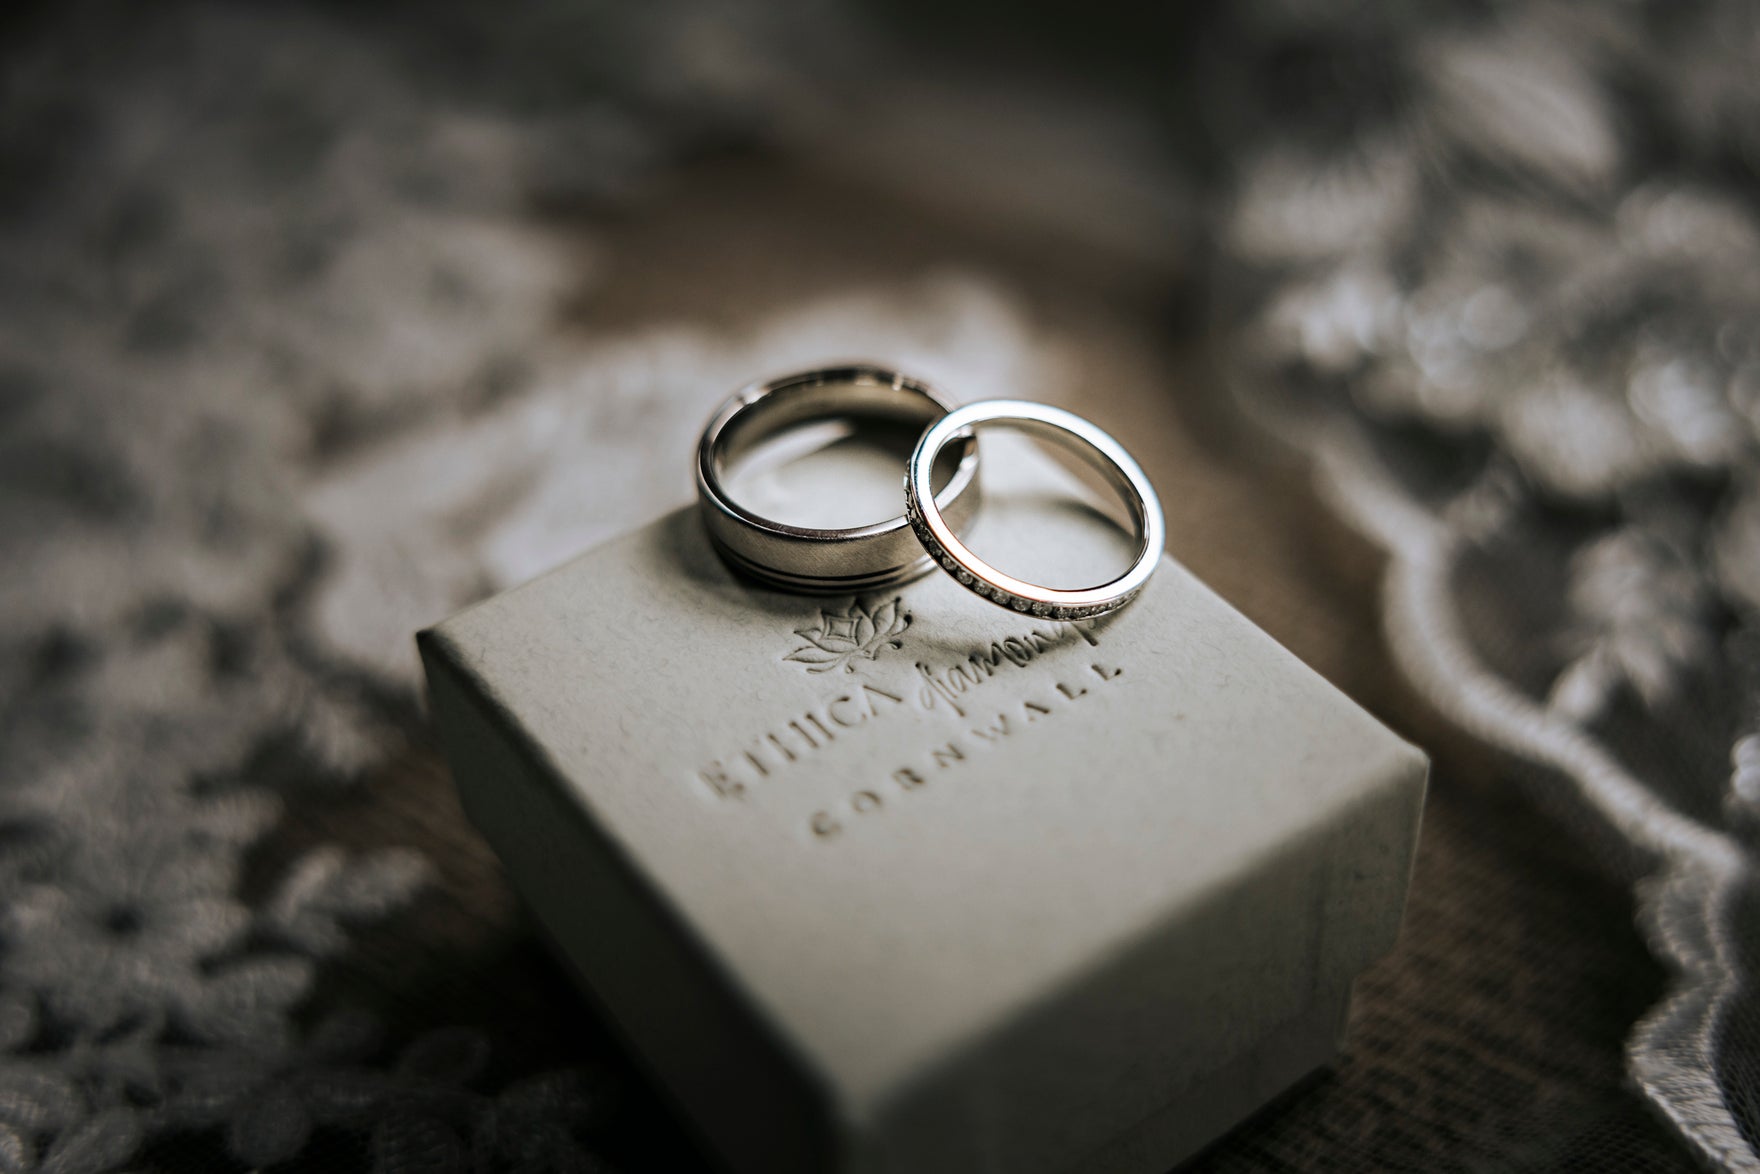 Mr and Mrs wedding rings placed on top of Ethica Diamonds ring box with veil in the background.